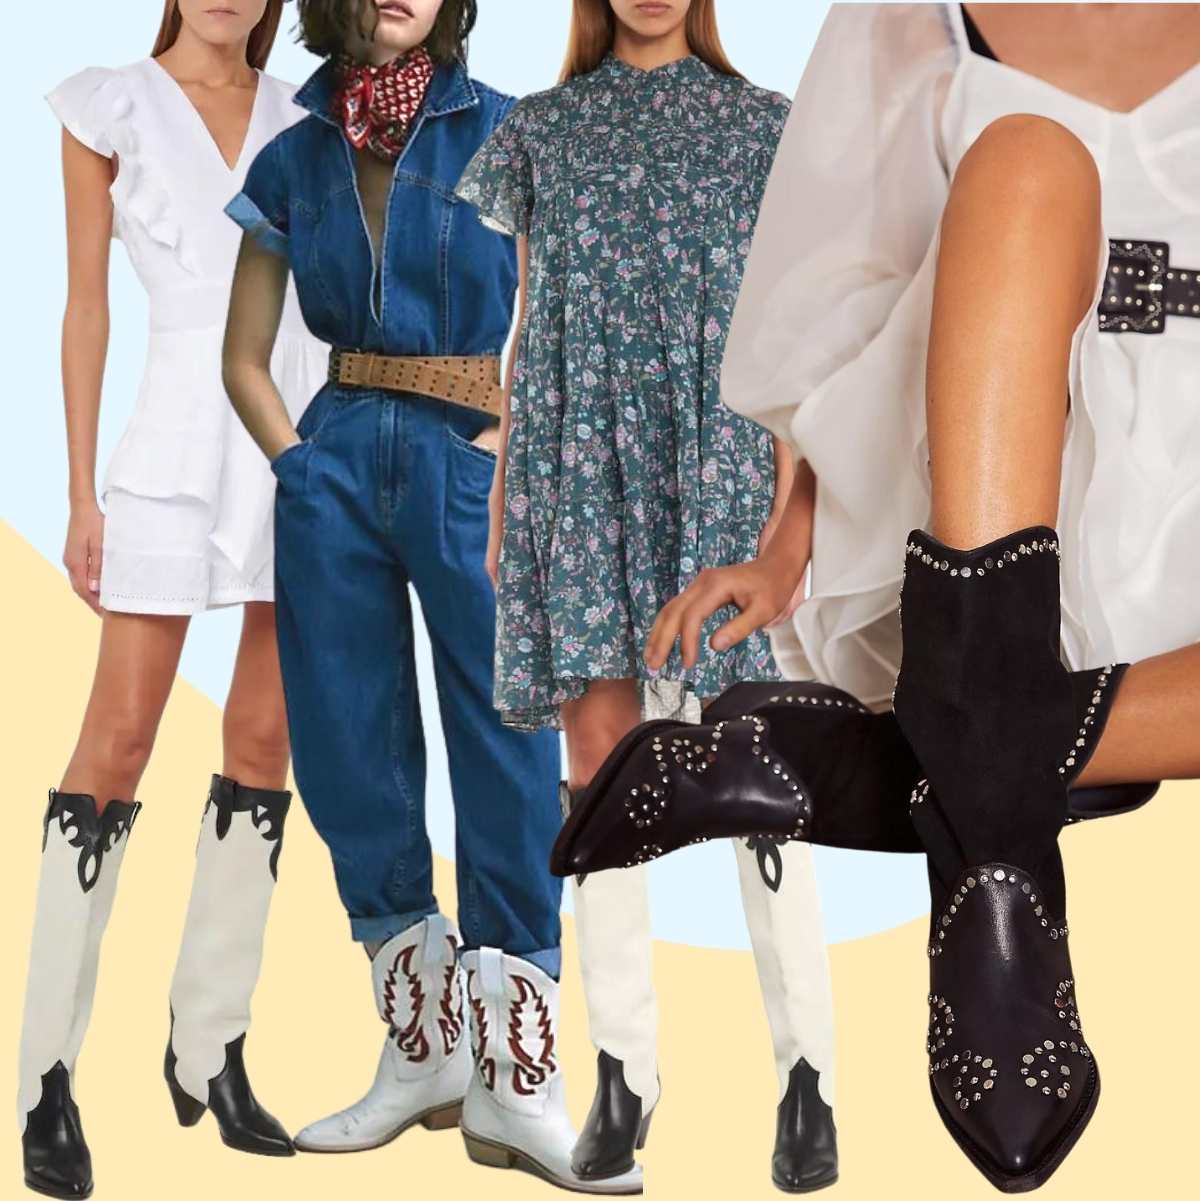 Collage of 4 women wearing different black and white cowboy boots outfits,